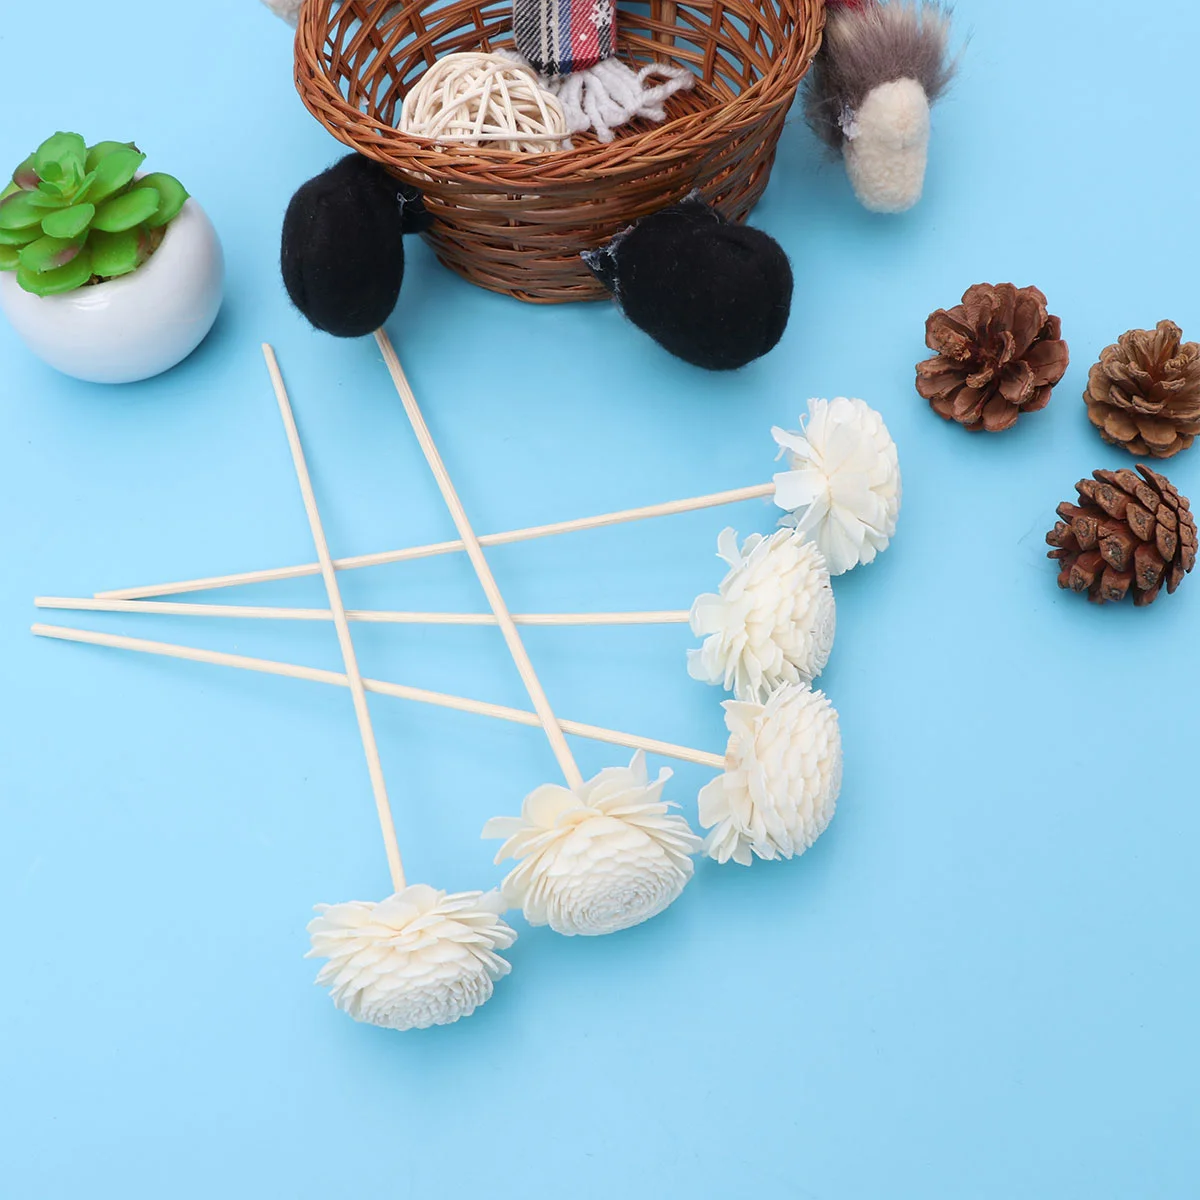 5 Pcs Rattan Reed Sticks Flower Top Decor Fragrance Reed Essential Oil Reeds for Office